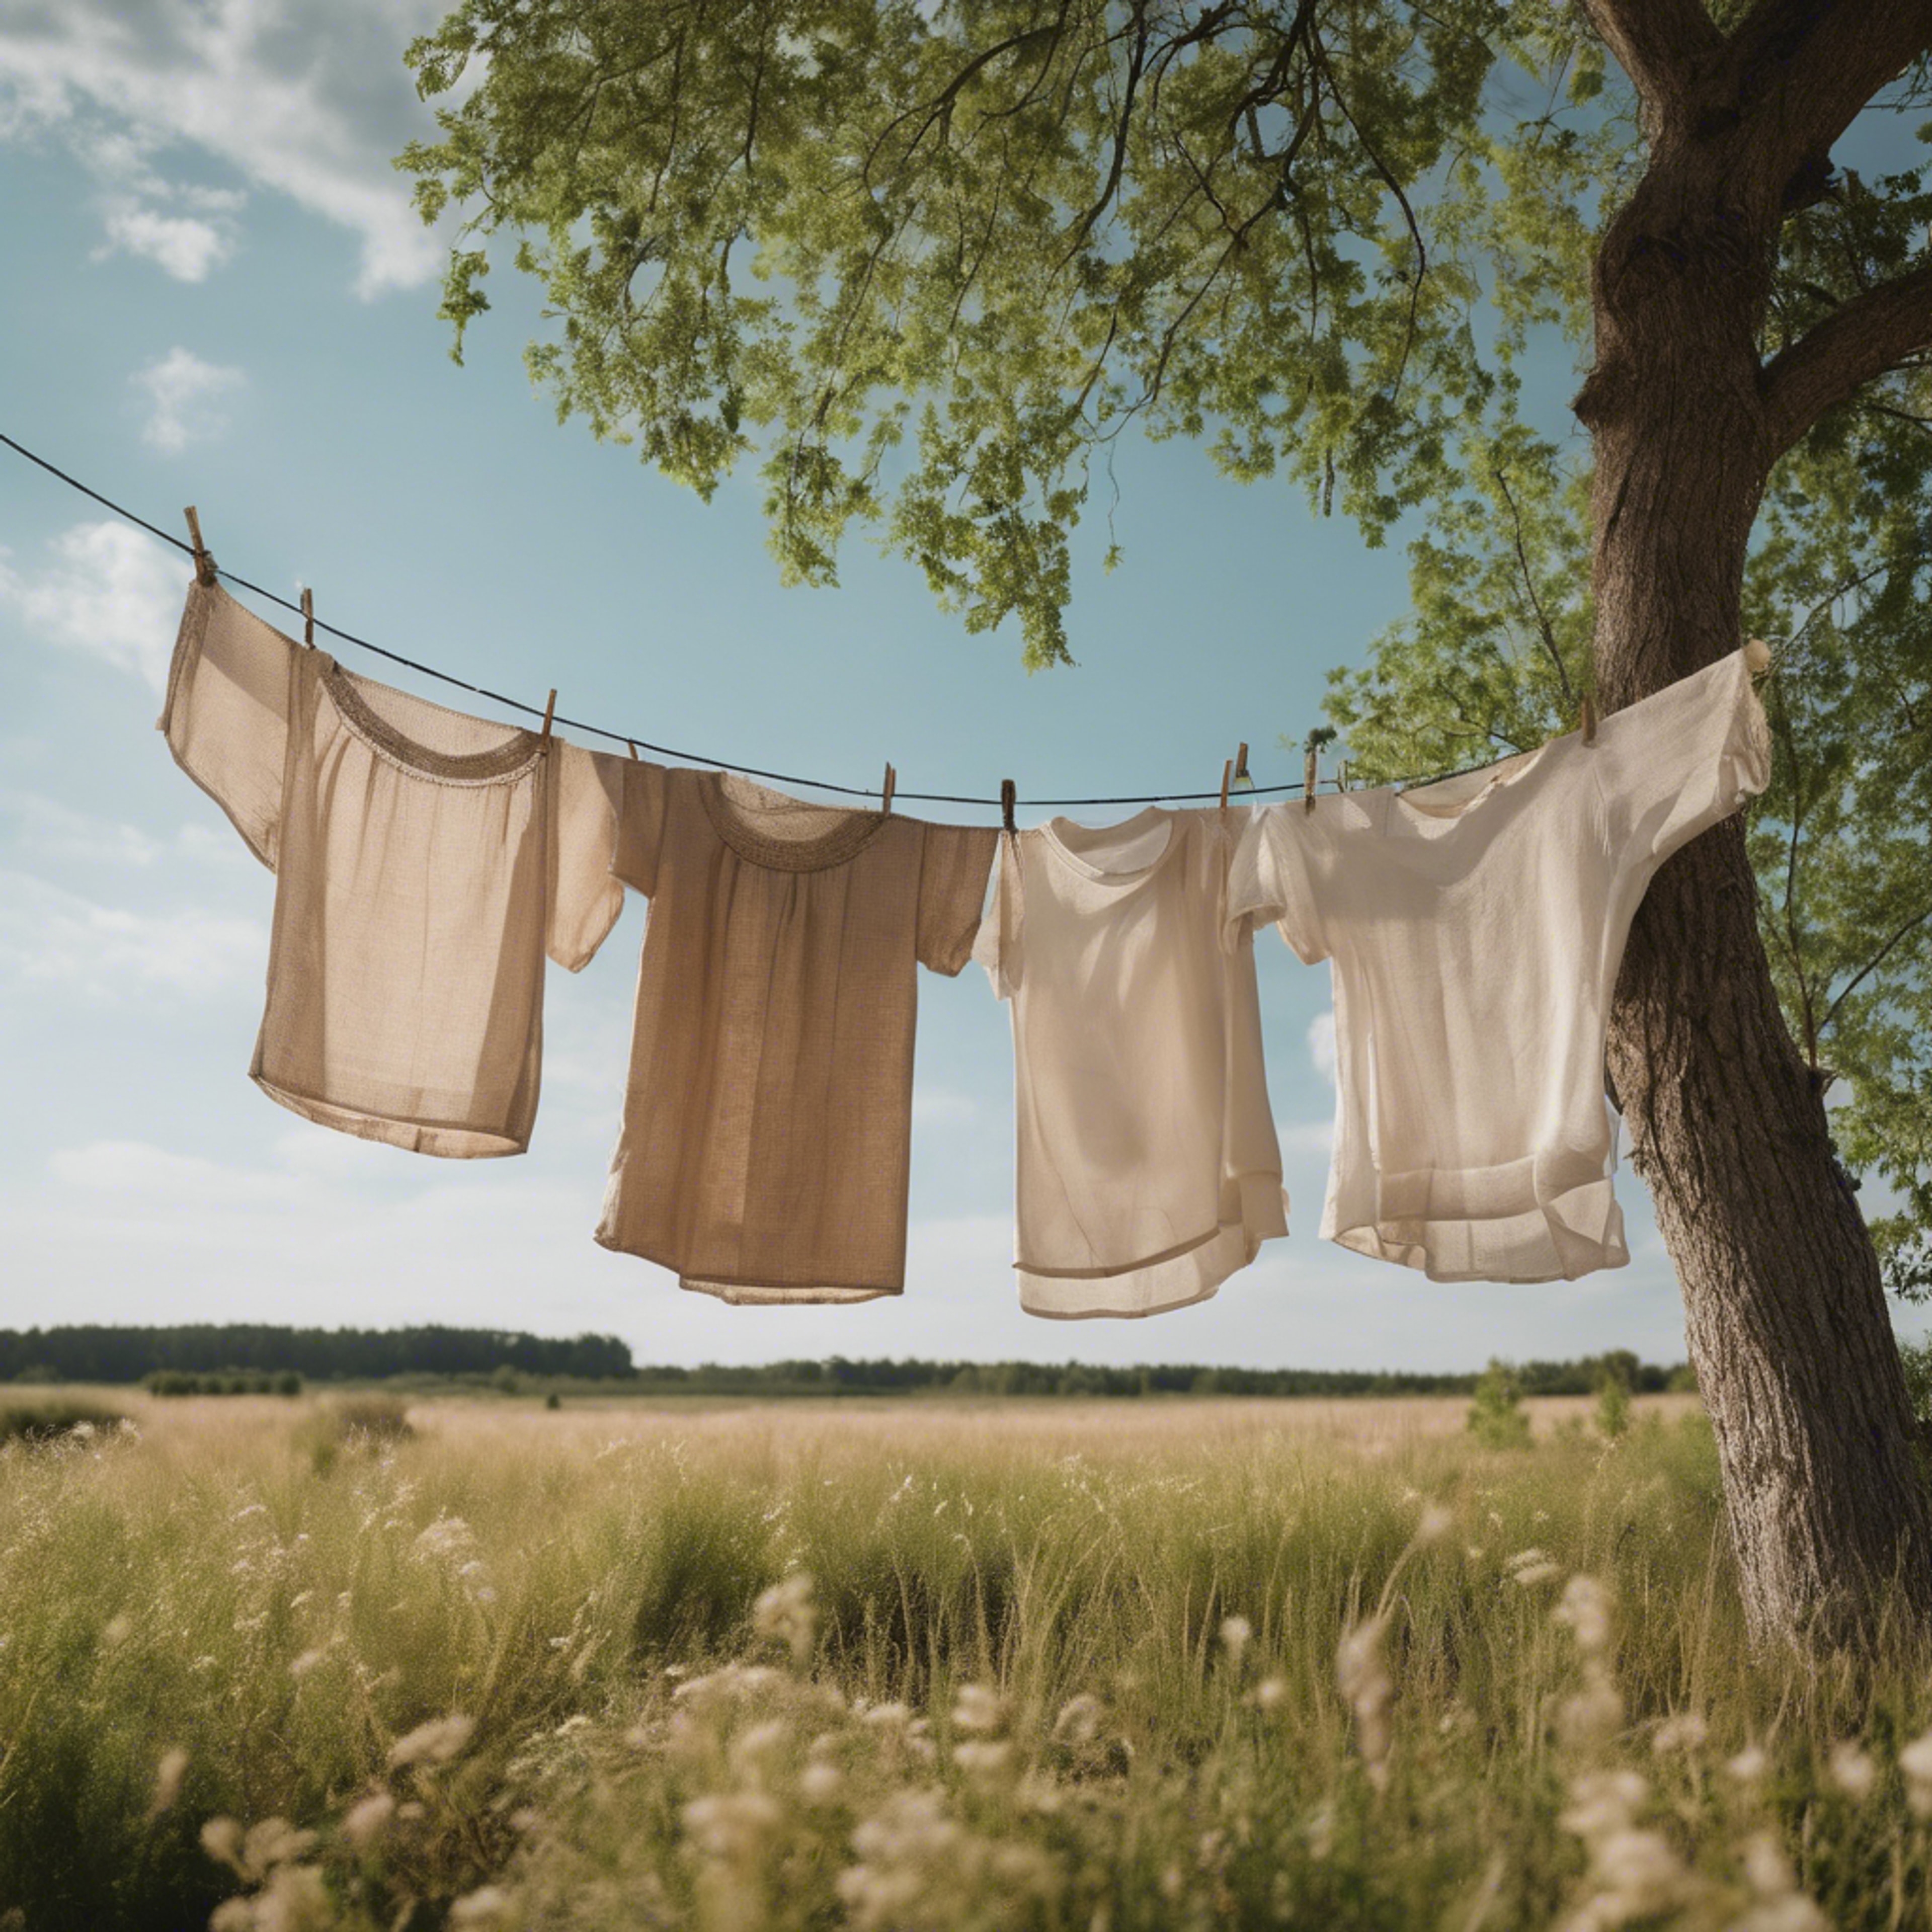 Linen dresses hanging on a clothesline drying in gentle summer breeze.壁紙[8f22f8c19713435ab90a]